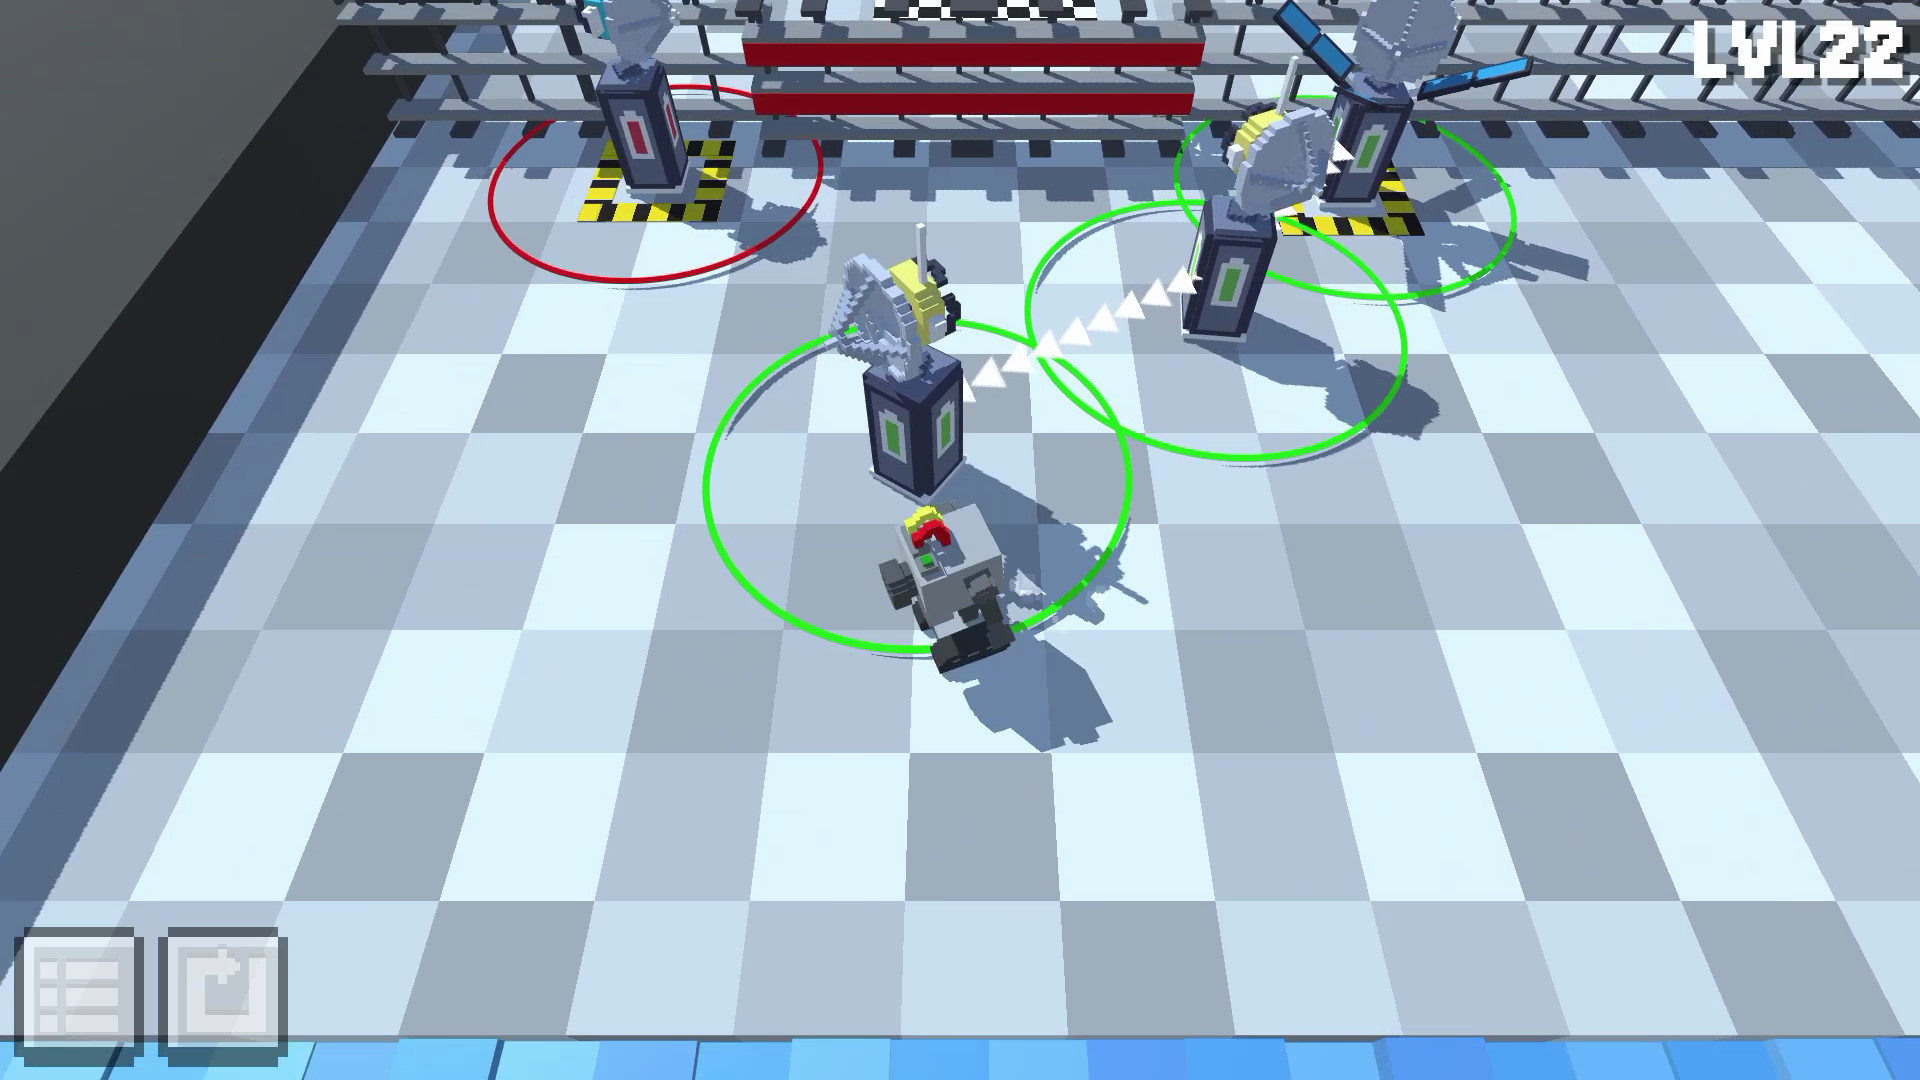 Connected Towers screenshot